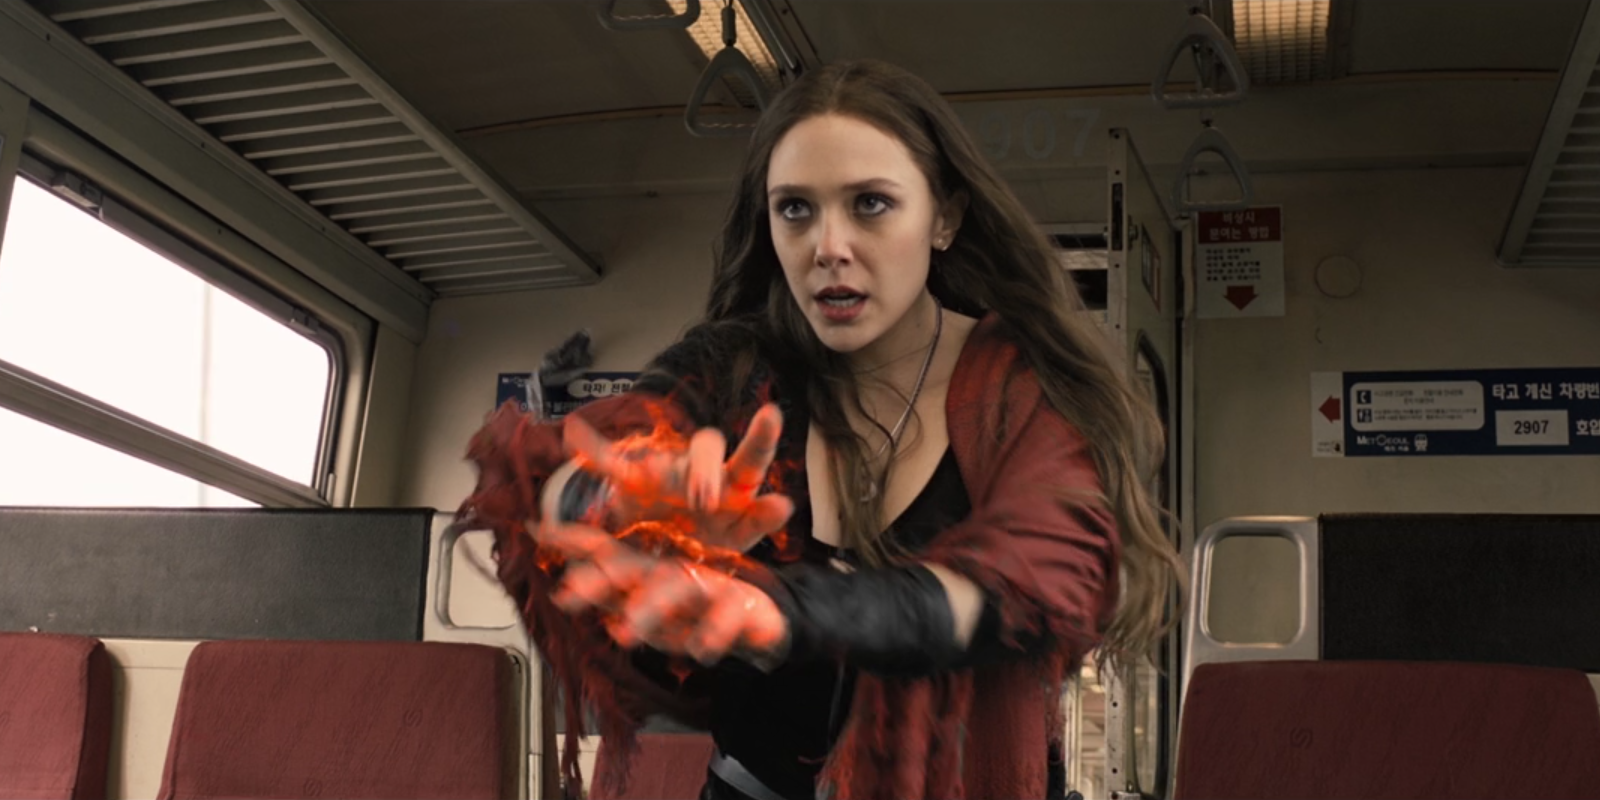 Scarlet Witch (Wanda Maximoff) on the train in Seoul, South Korea;  Avengers: Age of Ultron